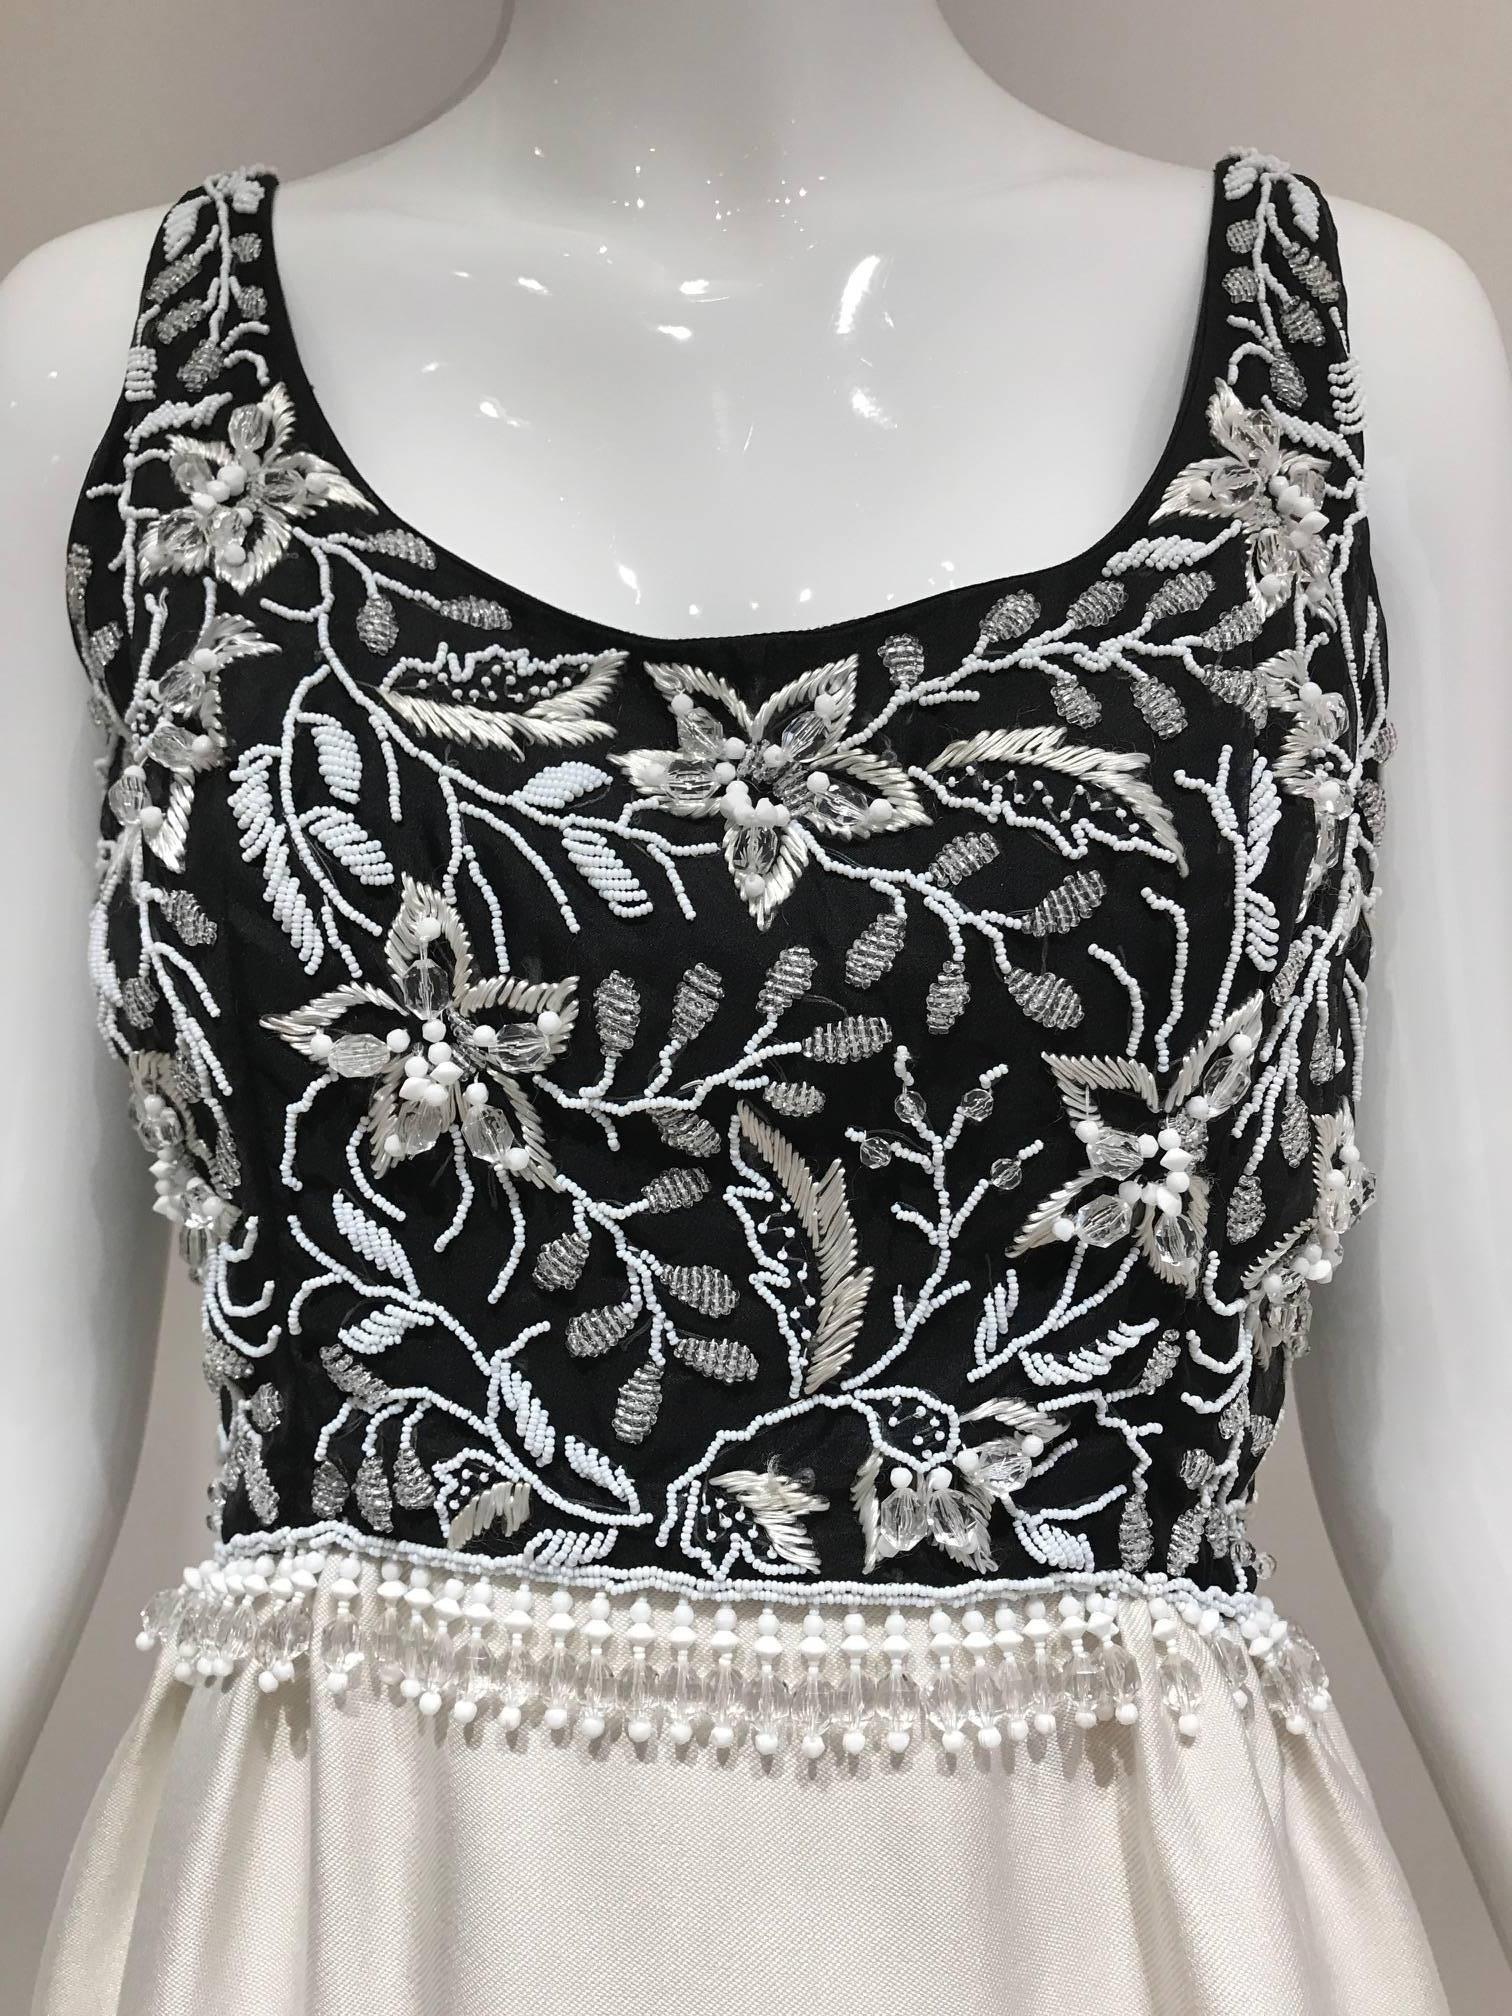 Vintage Malcolm Starr sleeveless black and white cocktail dress with beaded bodice.  
Fit size 4. 

**** This Garment has been professionally Dry Cleaned and Ready to wear.

